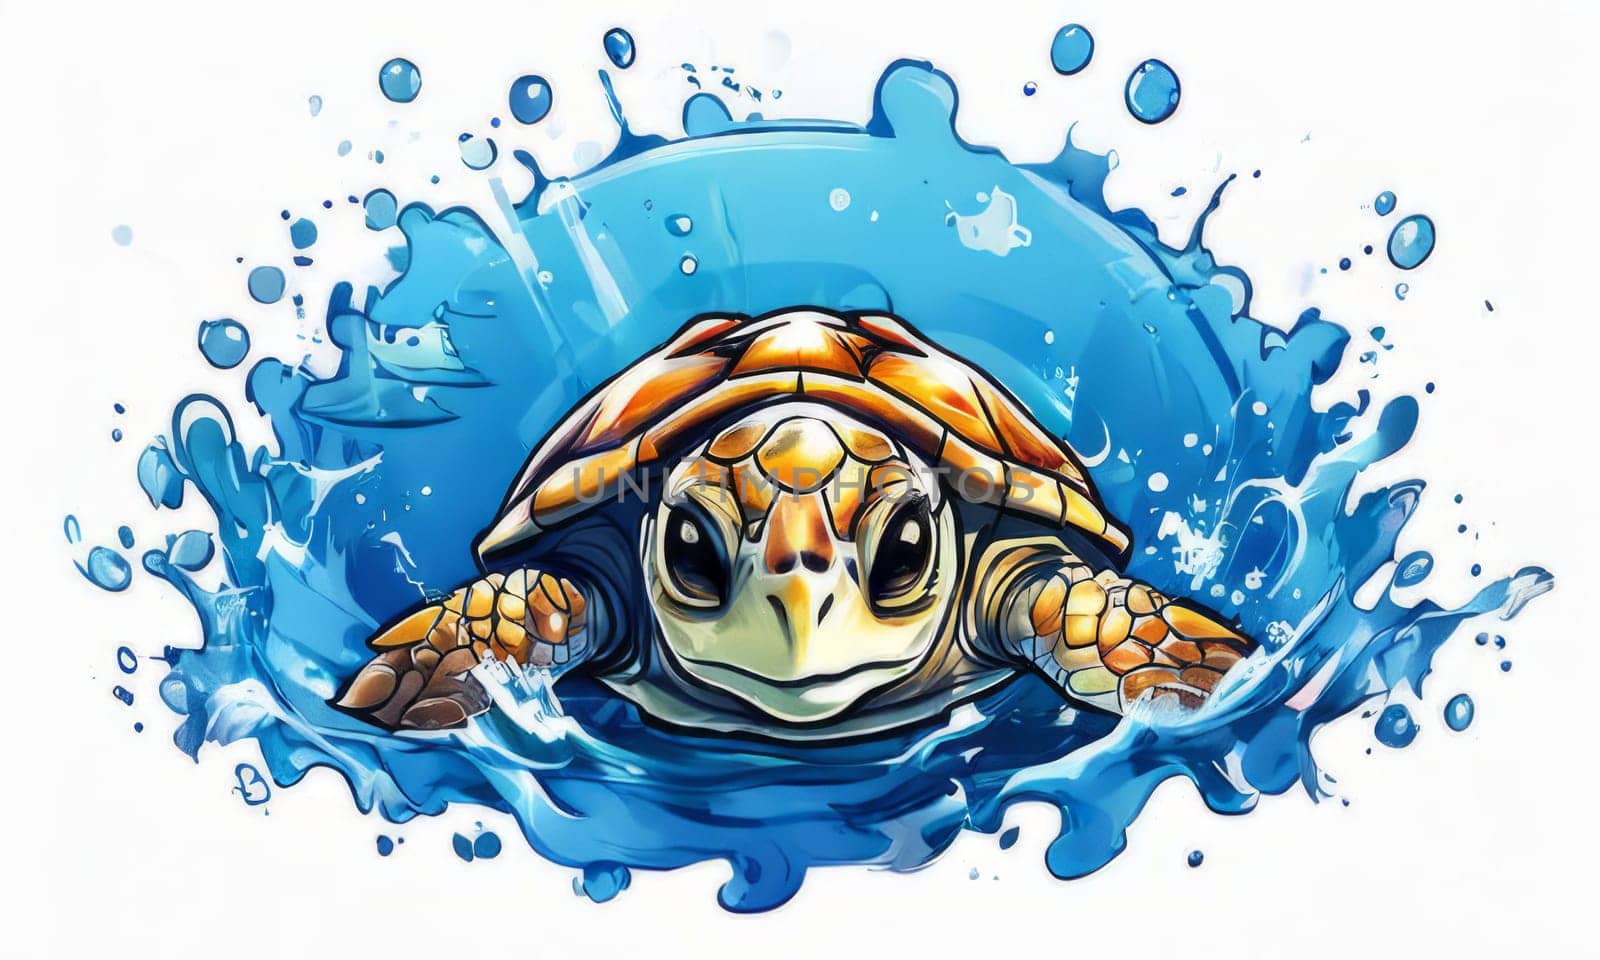 Majestic turtle glides effortlessly through clear blue waters, its shell glistening in sunlight. For educational materials for kids, game design, animated movies, tourism, stationery, Tshirt design. by Angelsmoon